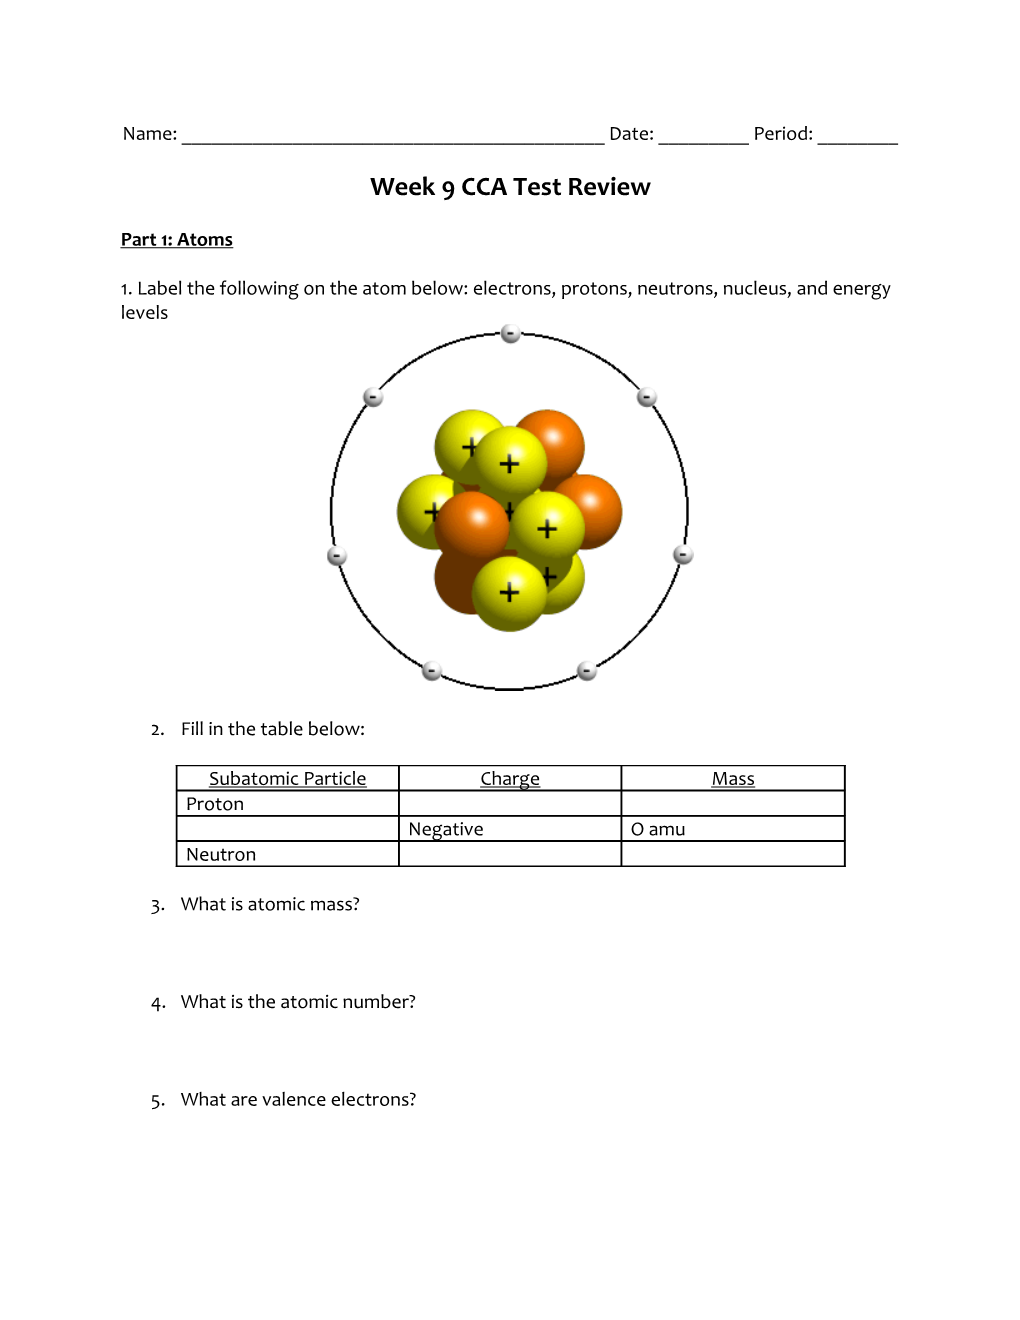 Week 9 CCA Test Review